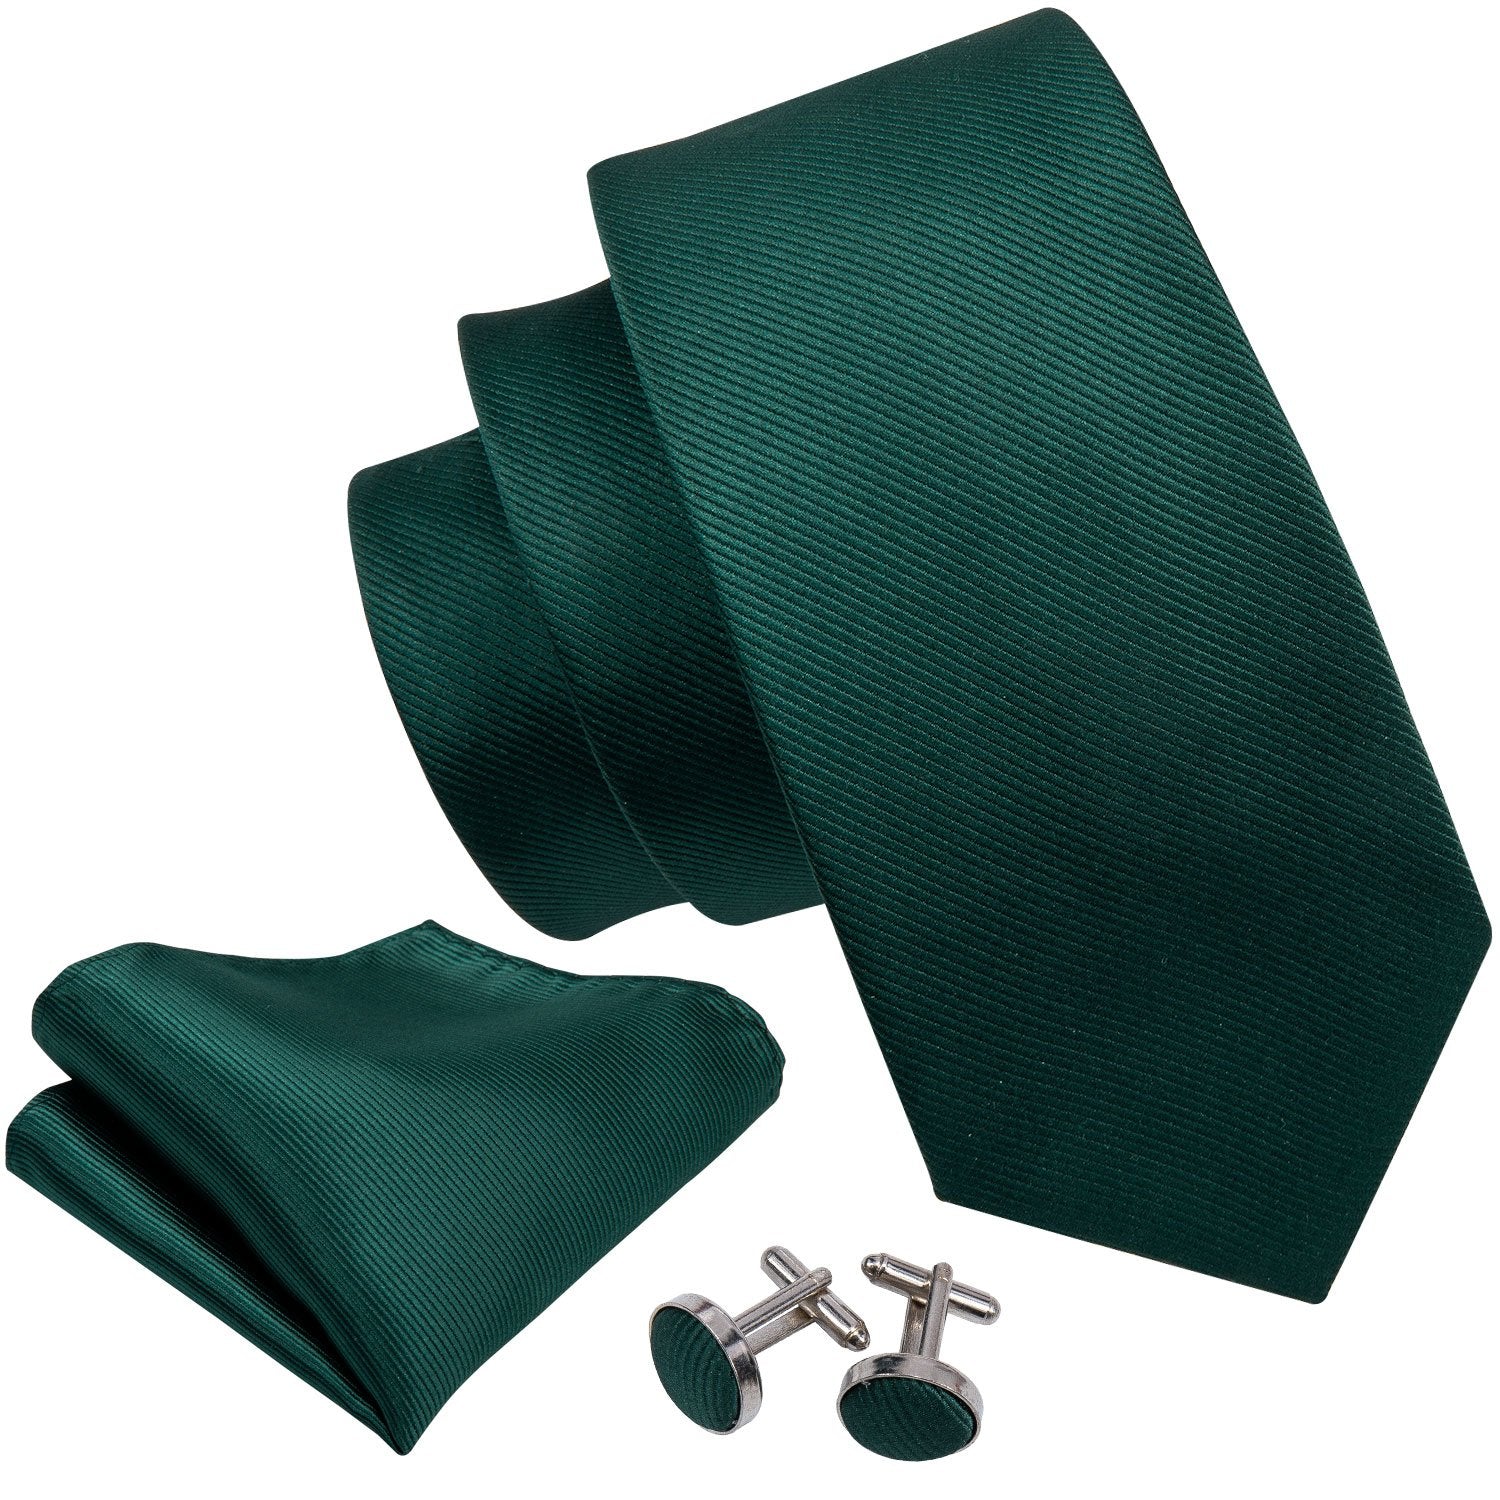 Barry Wang Green Tie Solid Men's Tie Pocket Square Cufflinks with Lapel Pin Brooch Set